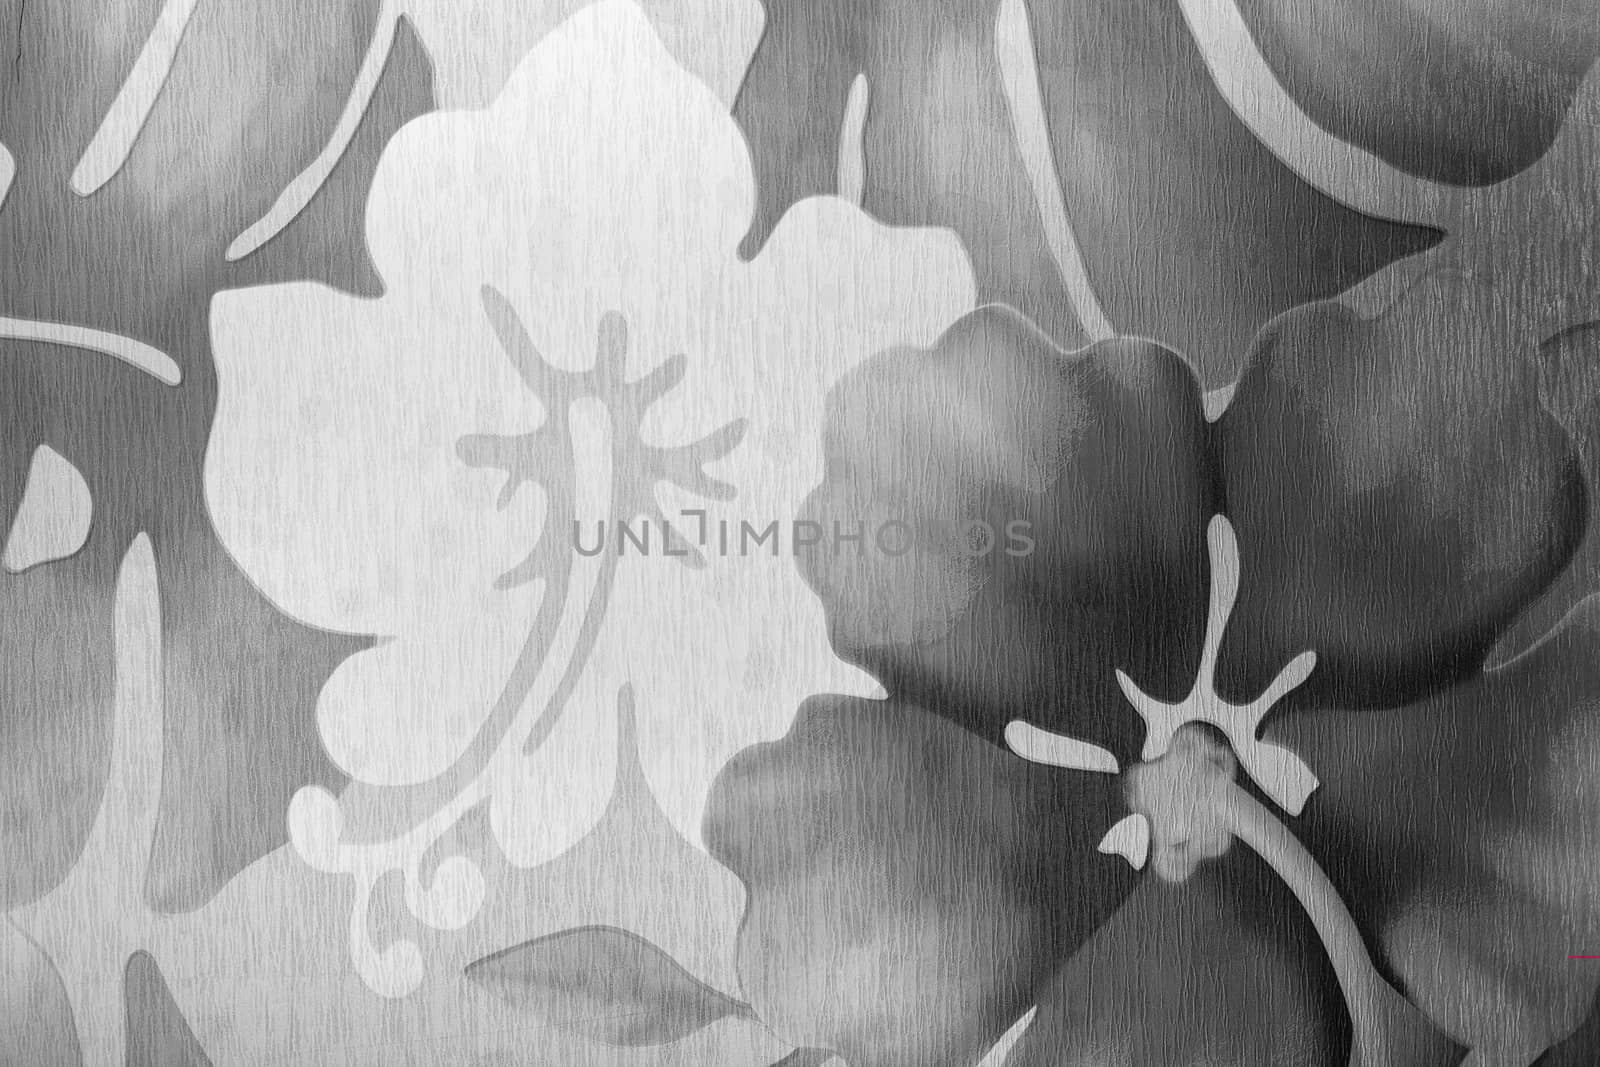 Plastic flower paintings for window blinds and wallpaper; black and white filter tone.